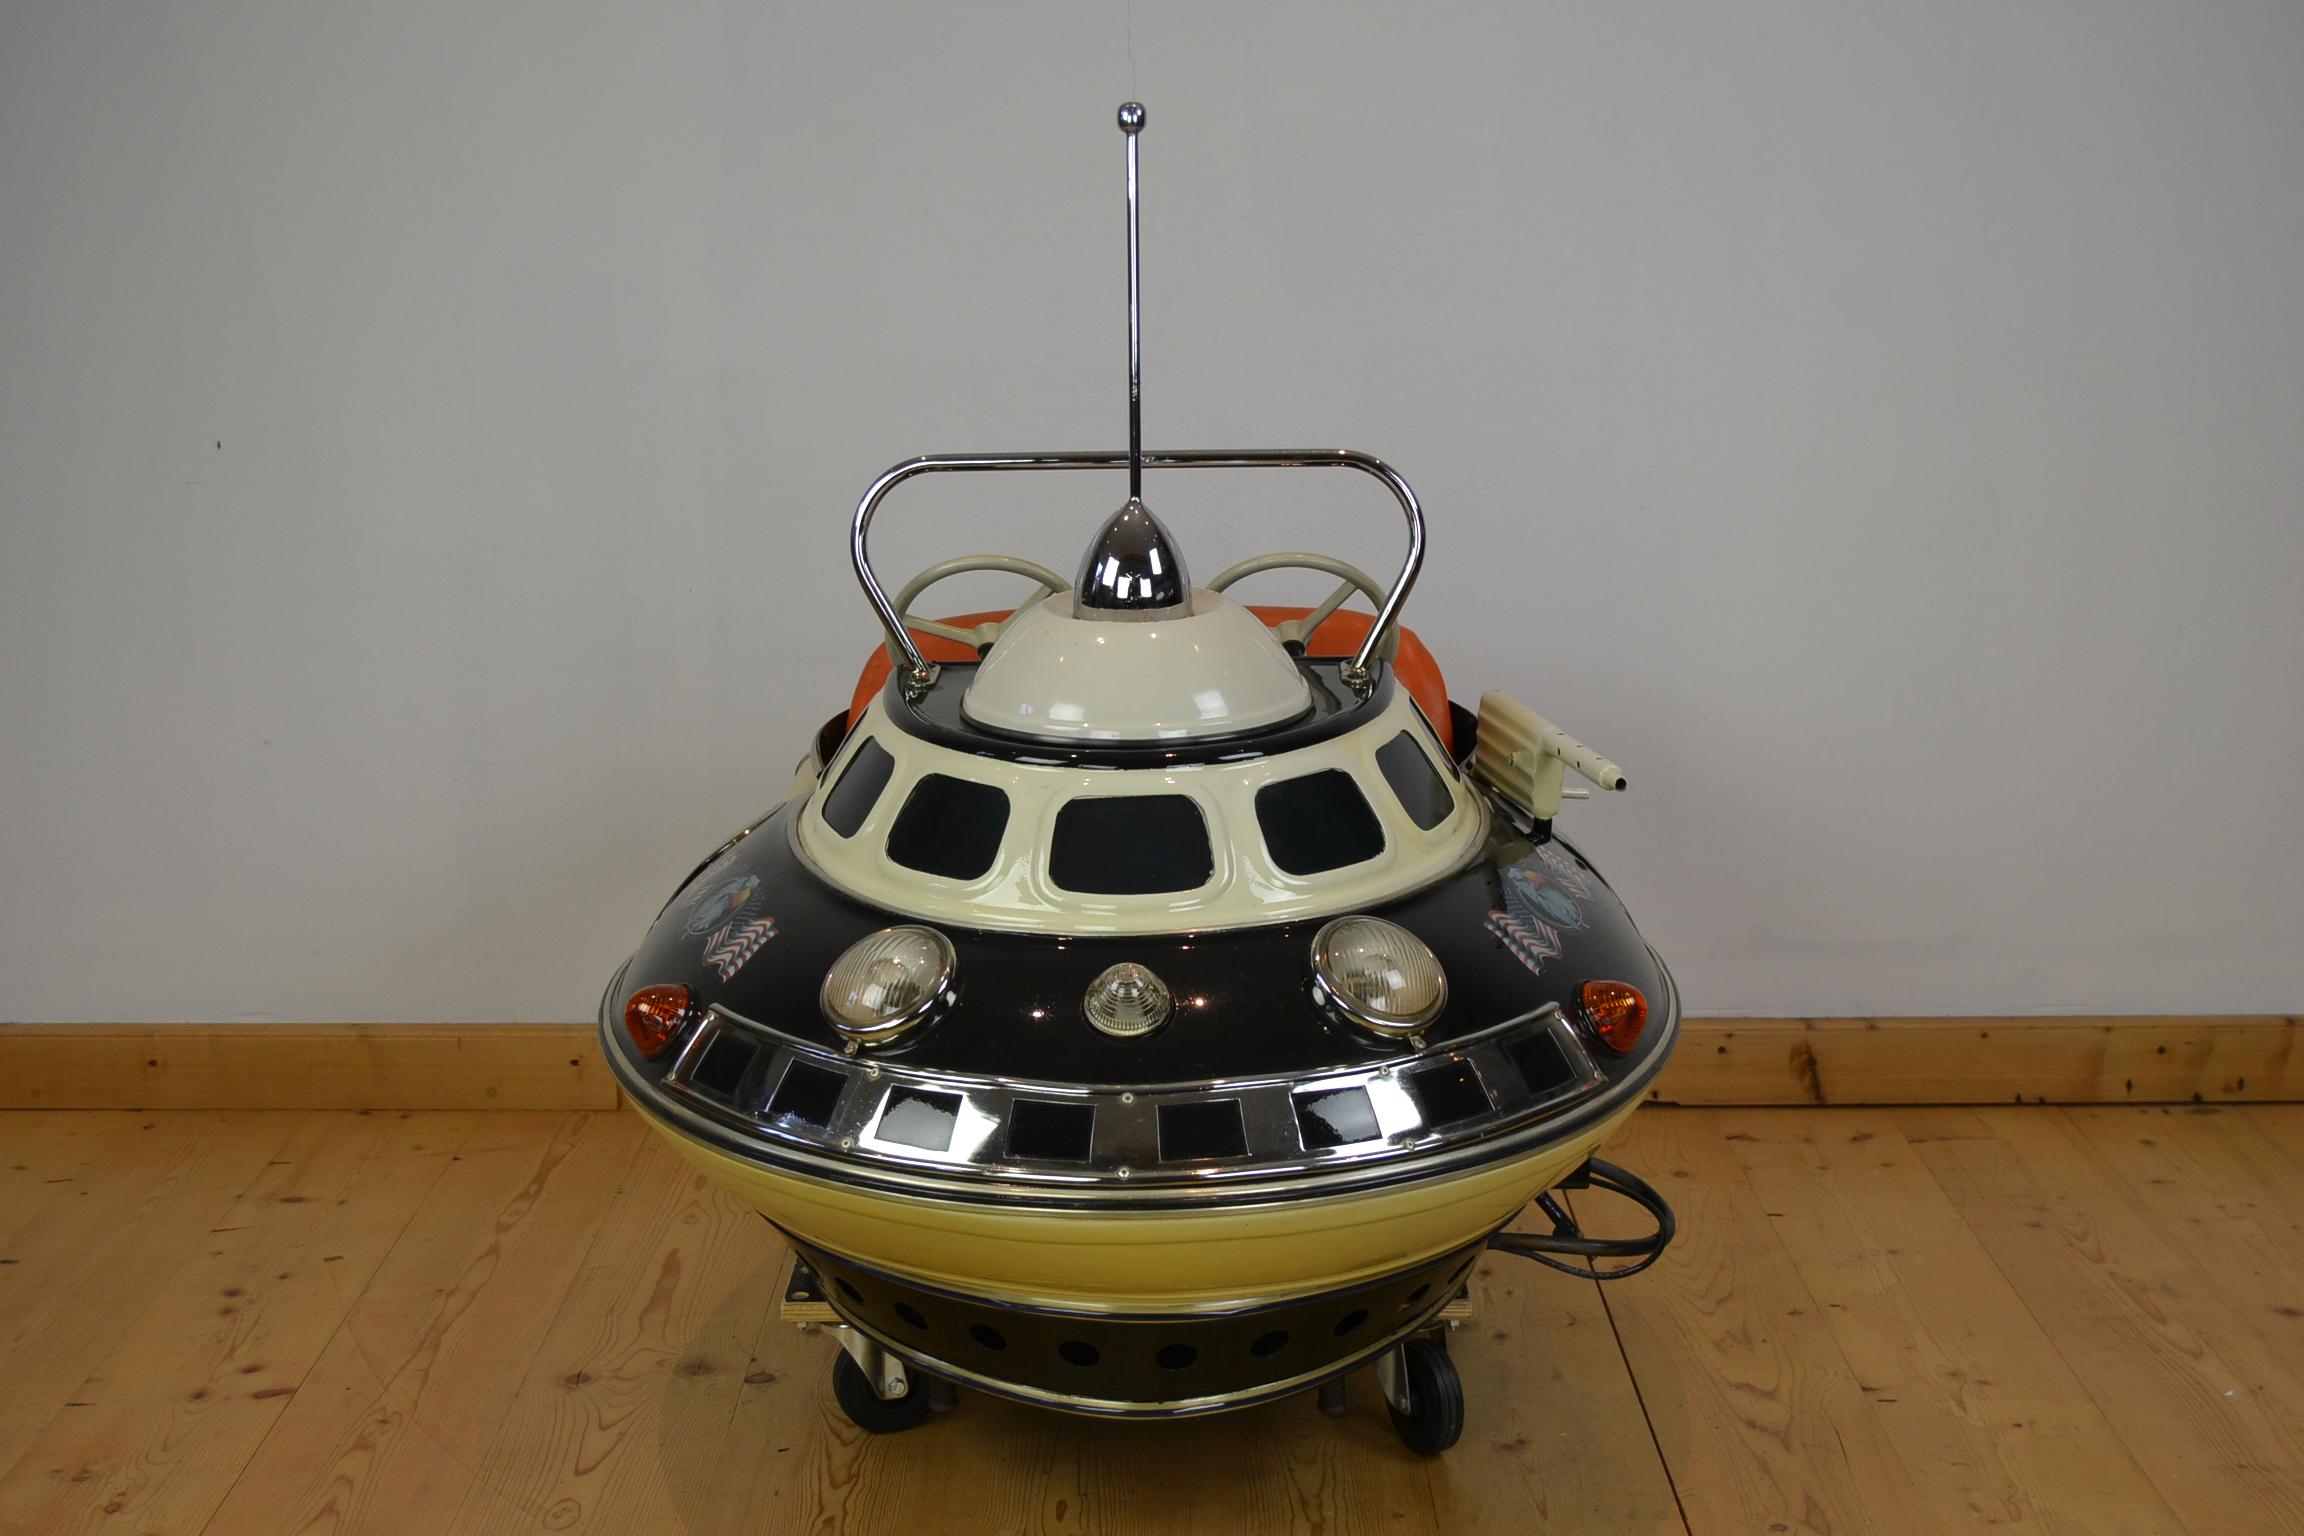 Space Age carnival ride seat in the shape of an UFO, made by L' Autopede Belgium.
This handmade metal 2-seat carousel ride object is in science fiction style and an awesome piece of carnival art. An astronautics shuttle for 2 children, still